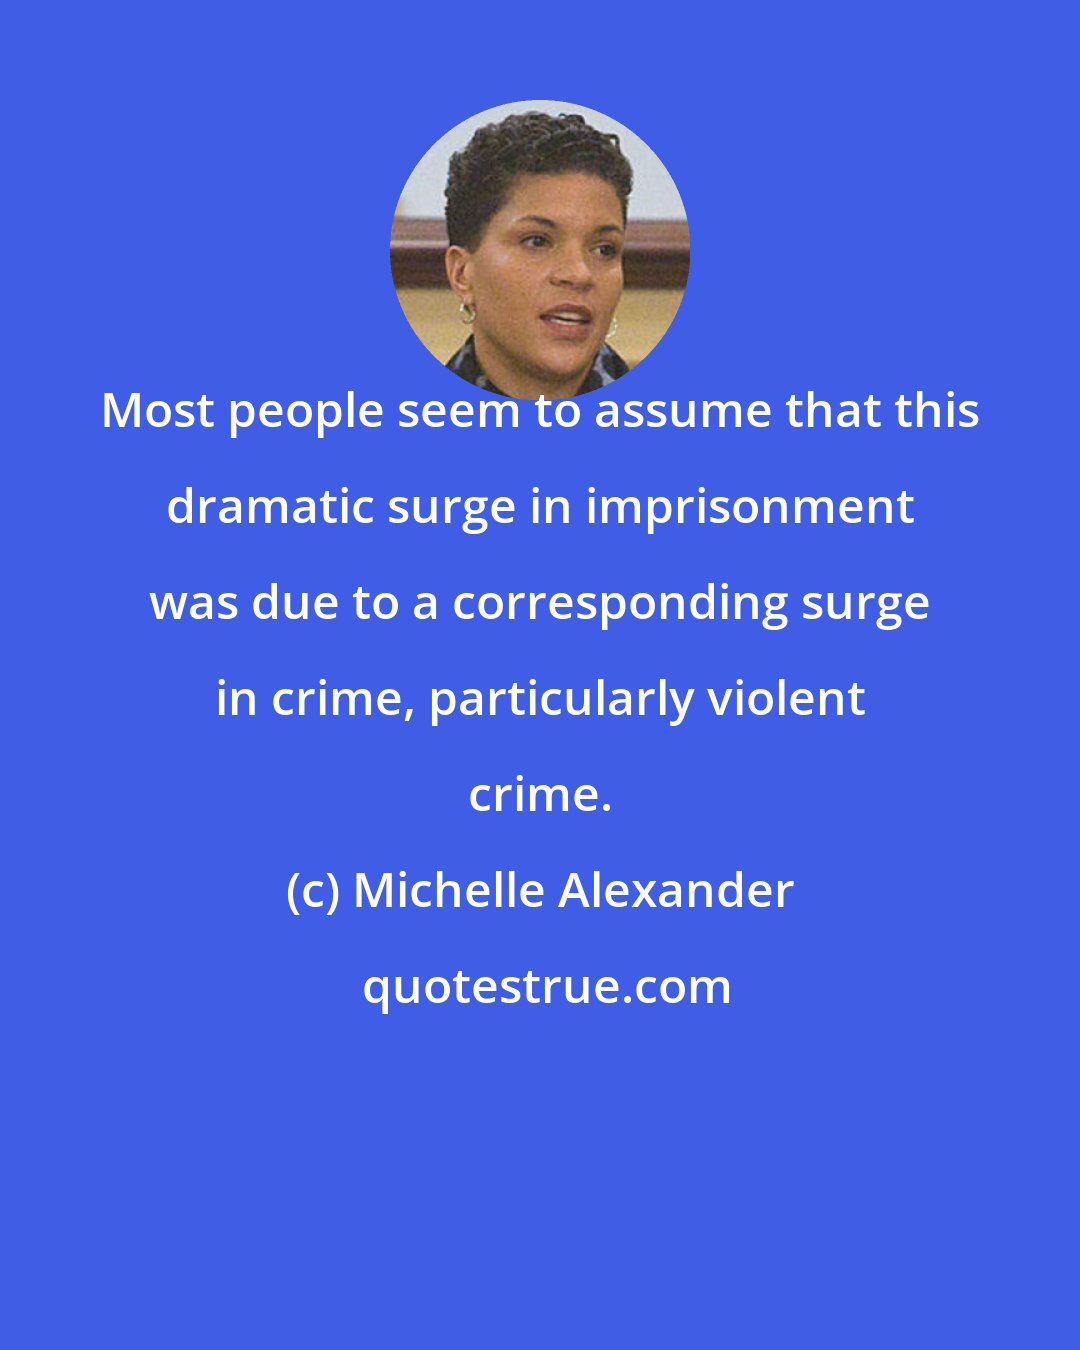 Michelle Alexander: Most people seem to assume that this dramatic surge in imprisonment was due to a corresponding surge in crime, particularly violent crime.